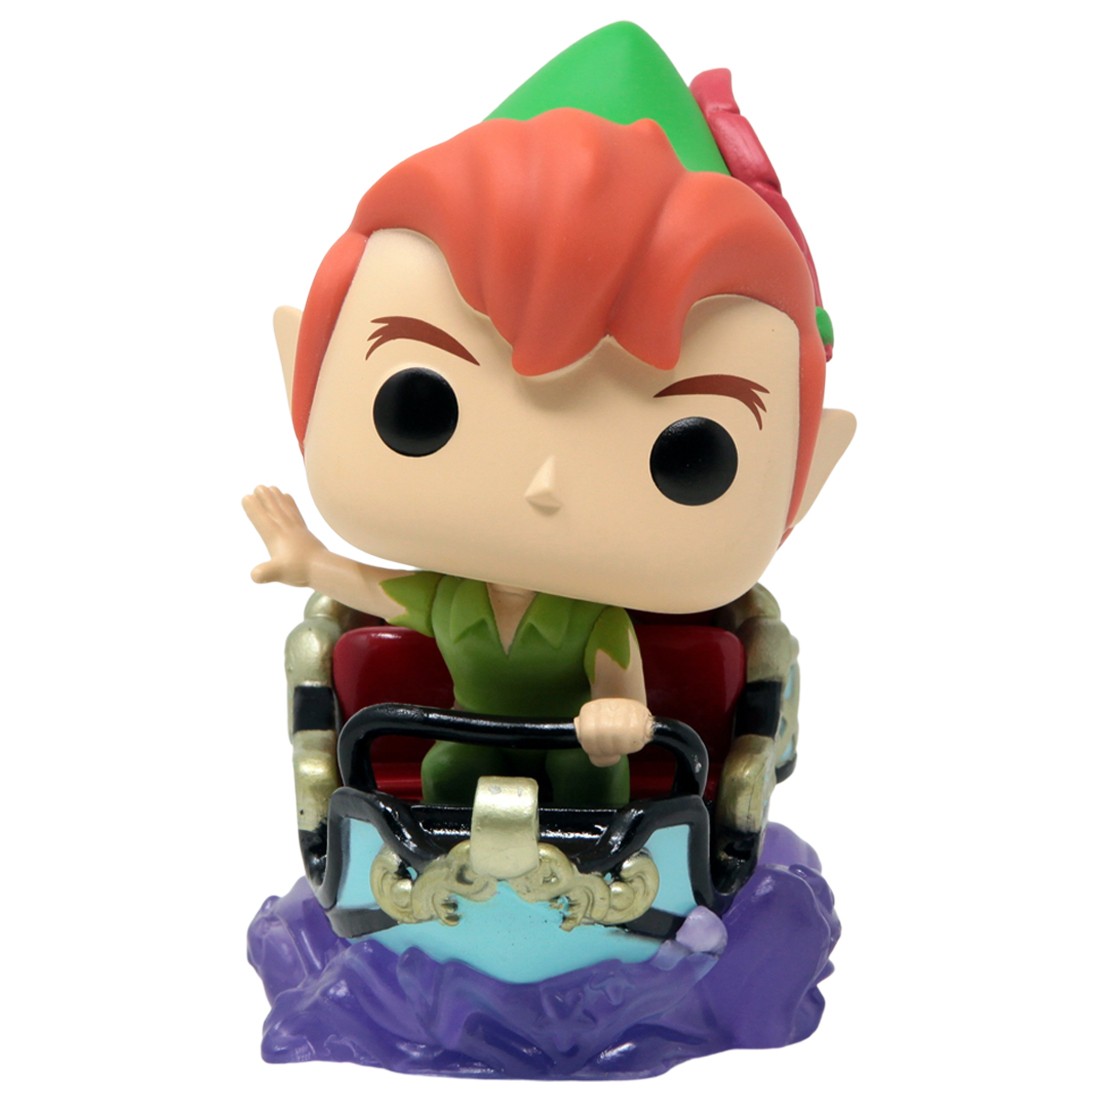 Funko POP Rides Disney 65th Anniversary Peter Pan At The Peter Pan's Flight  Attraction green